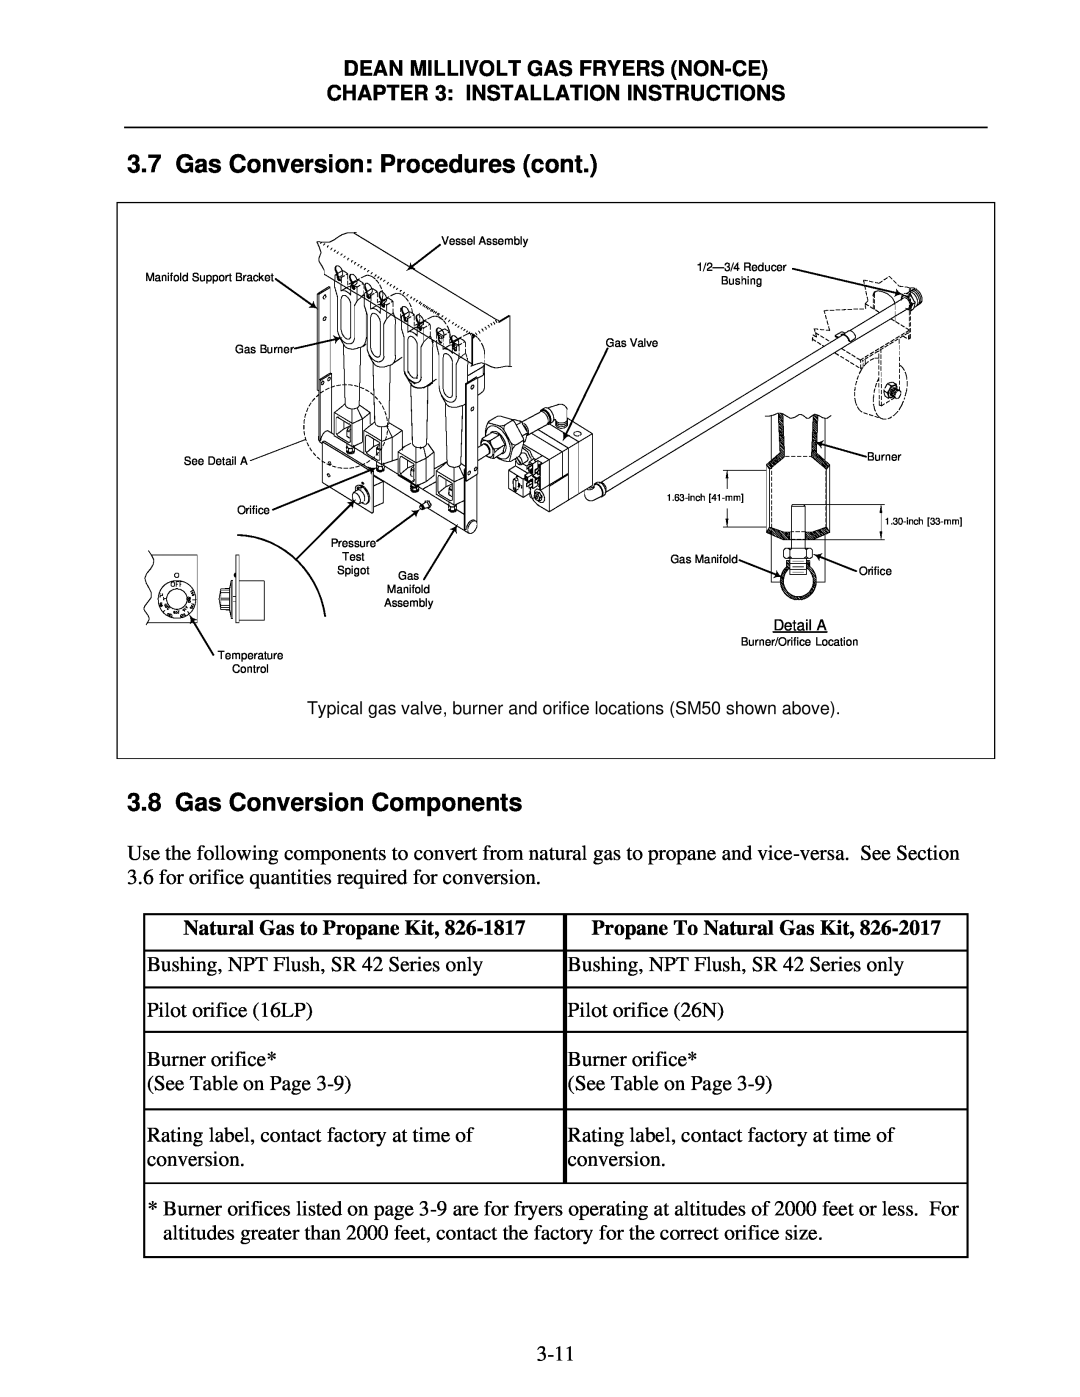 Frymaster SM35 operation manual Gas Conversion Procedures cont, Gas Conversion Components, Natural Gas to Propane Kit 